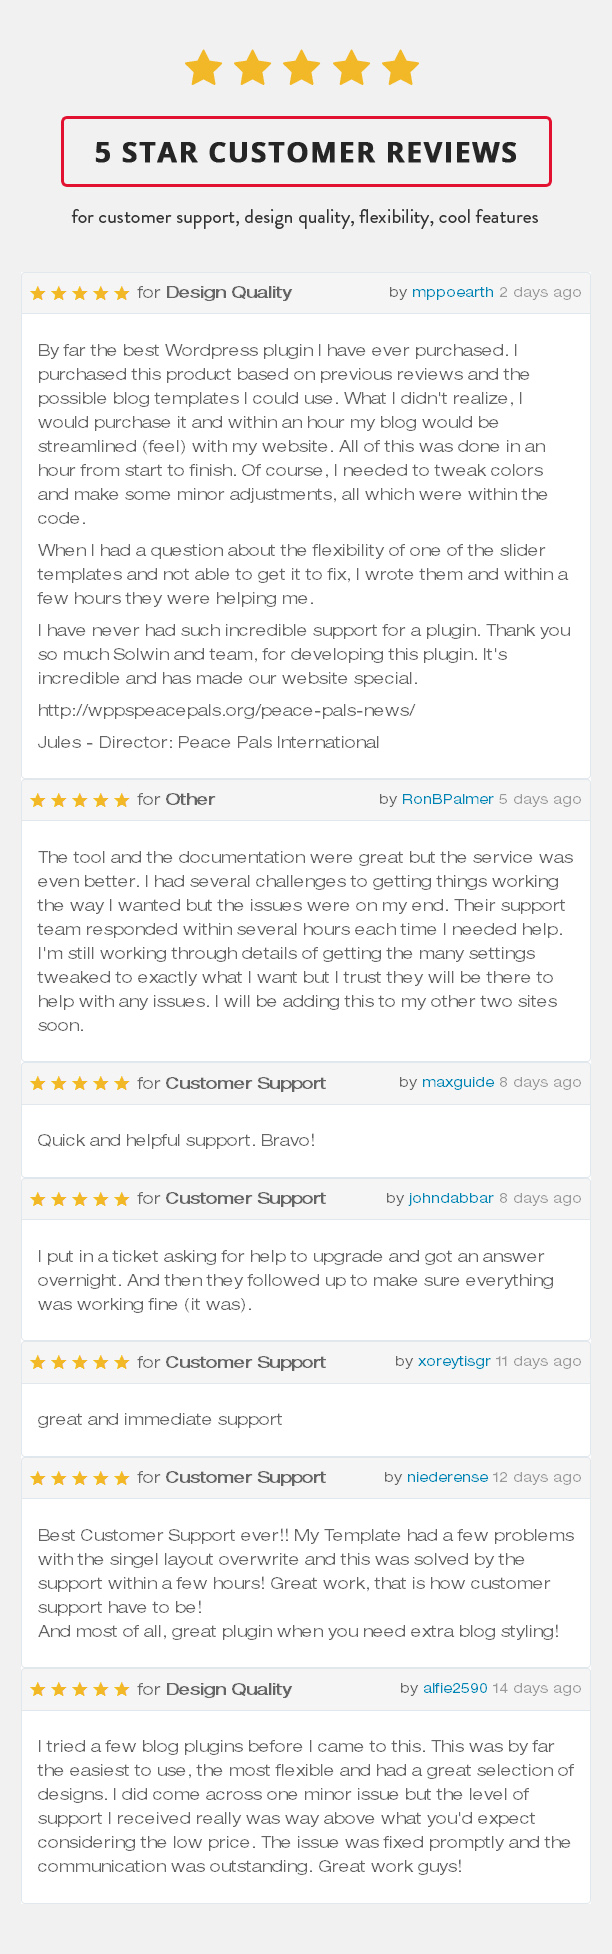 Blog Designer PRO Customer Review and Ratings